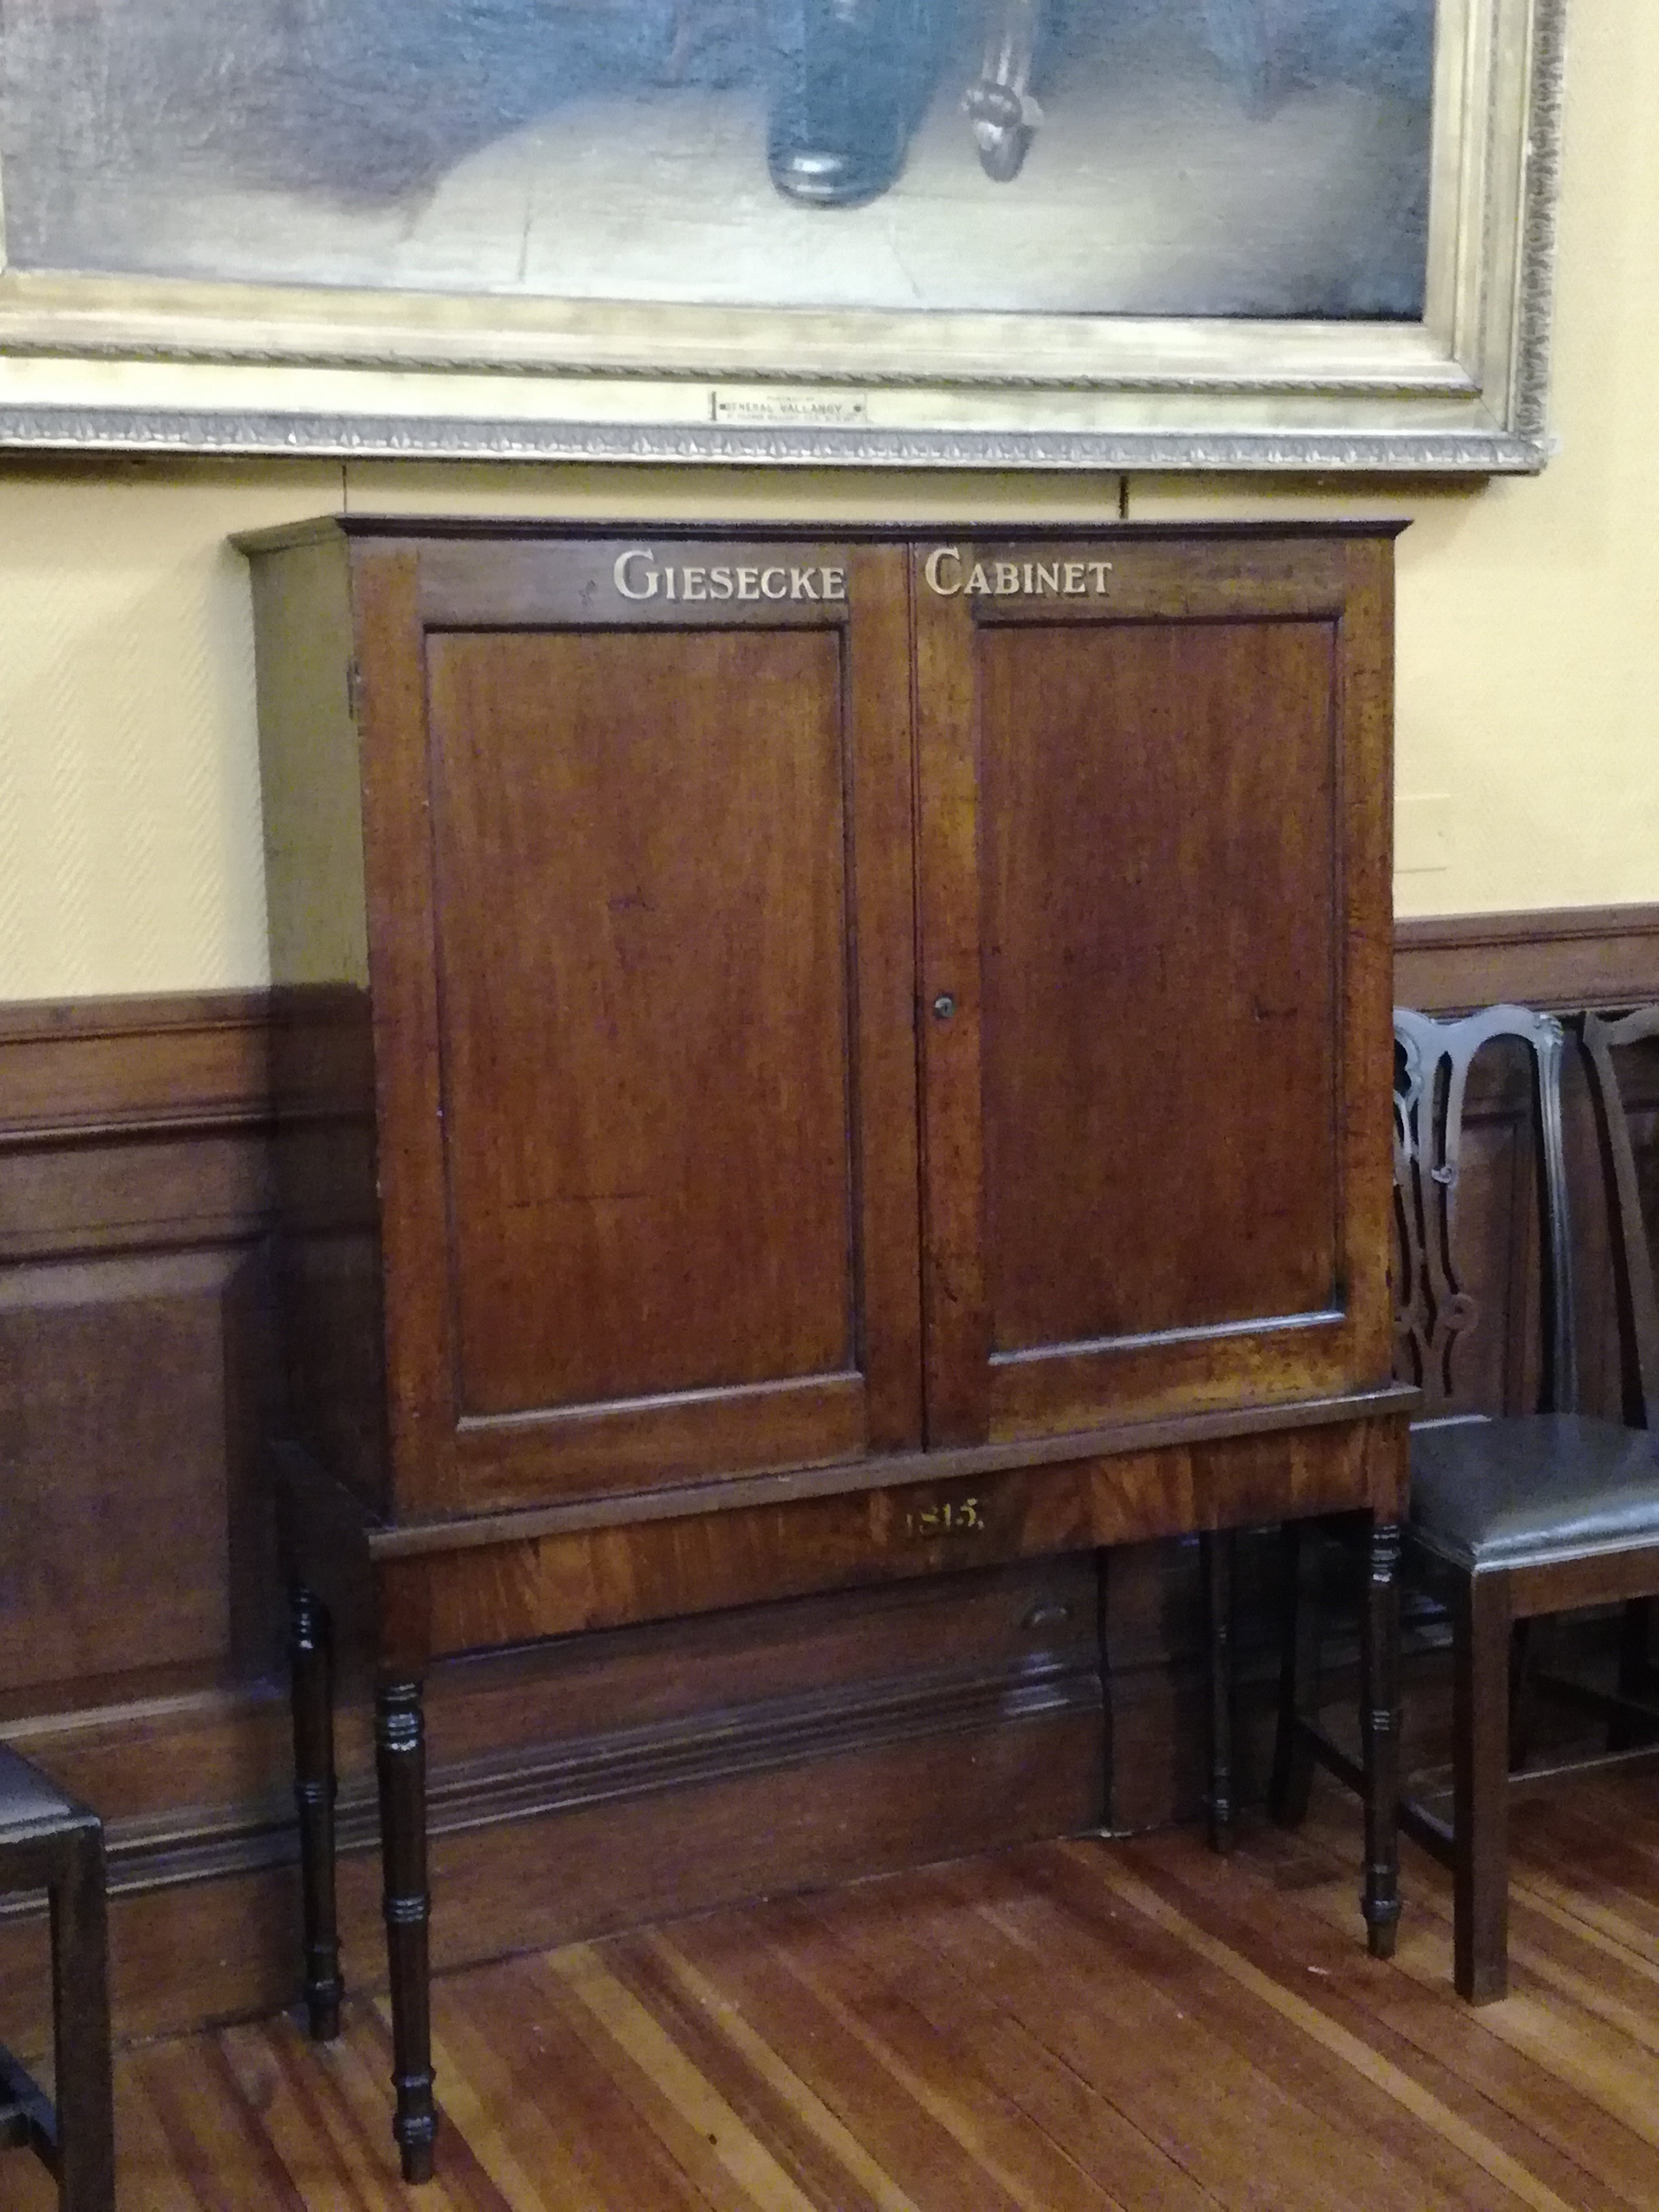 The cabinet which once contained the collections of Giesecke, in the RDS